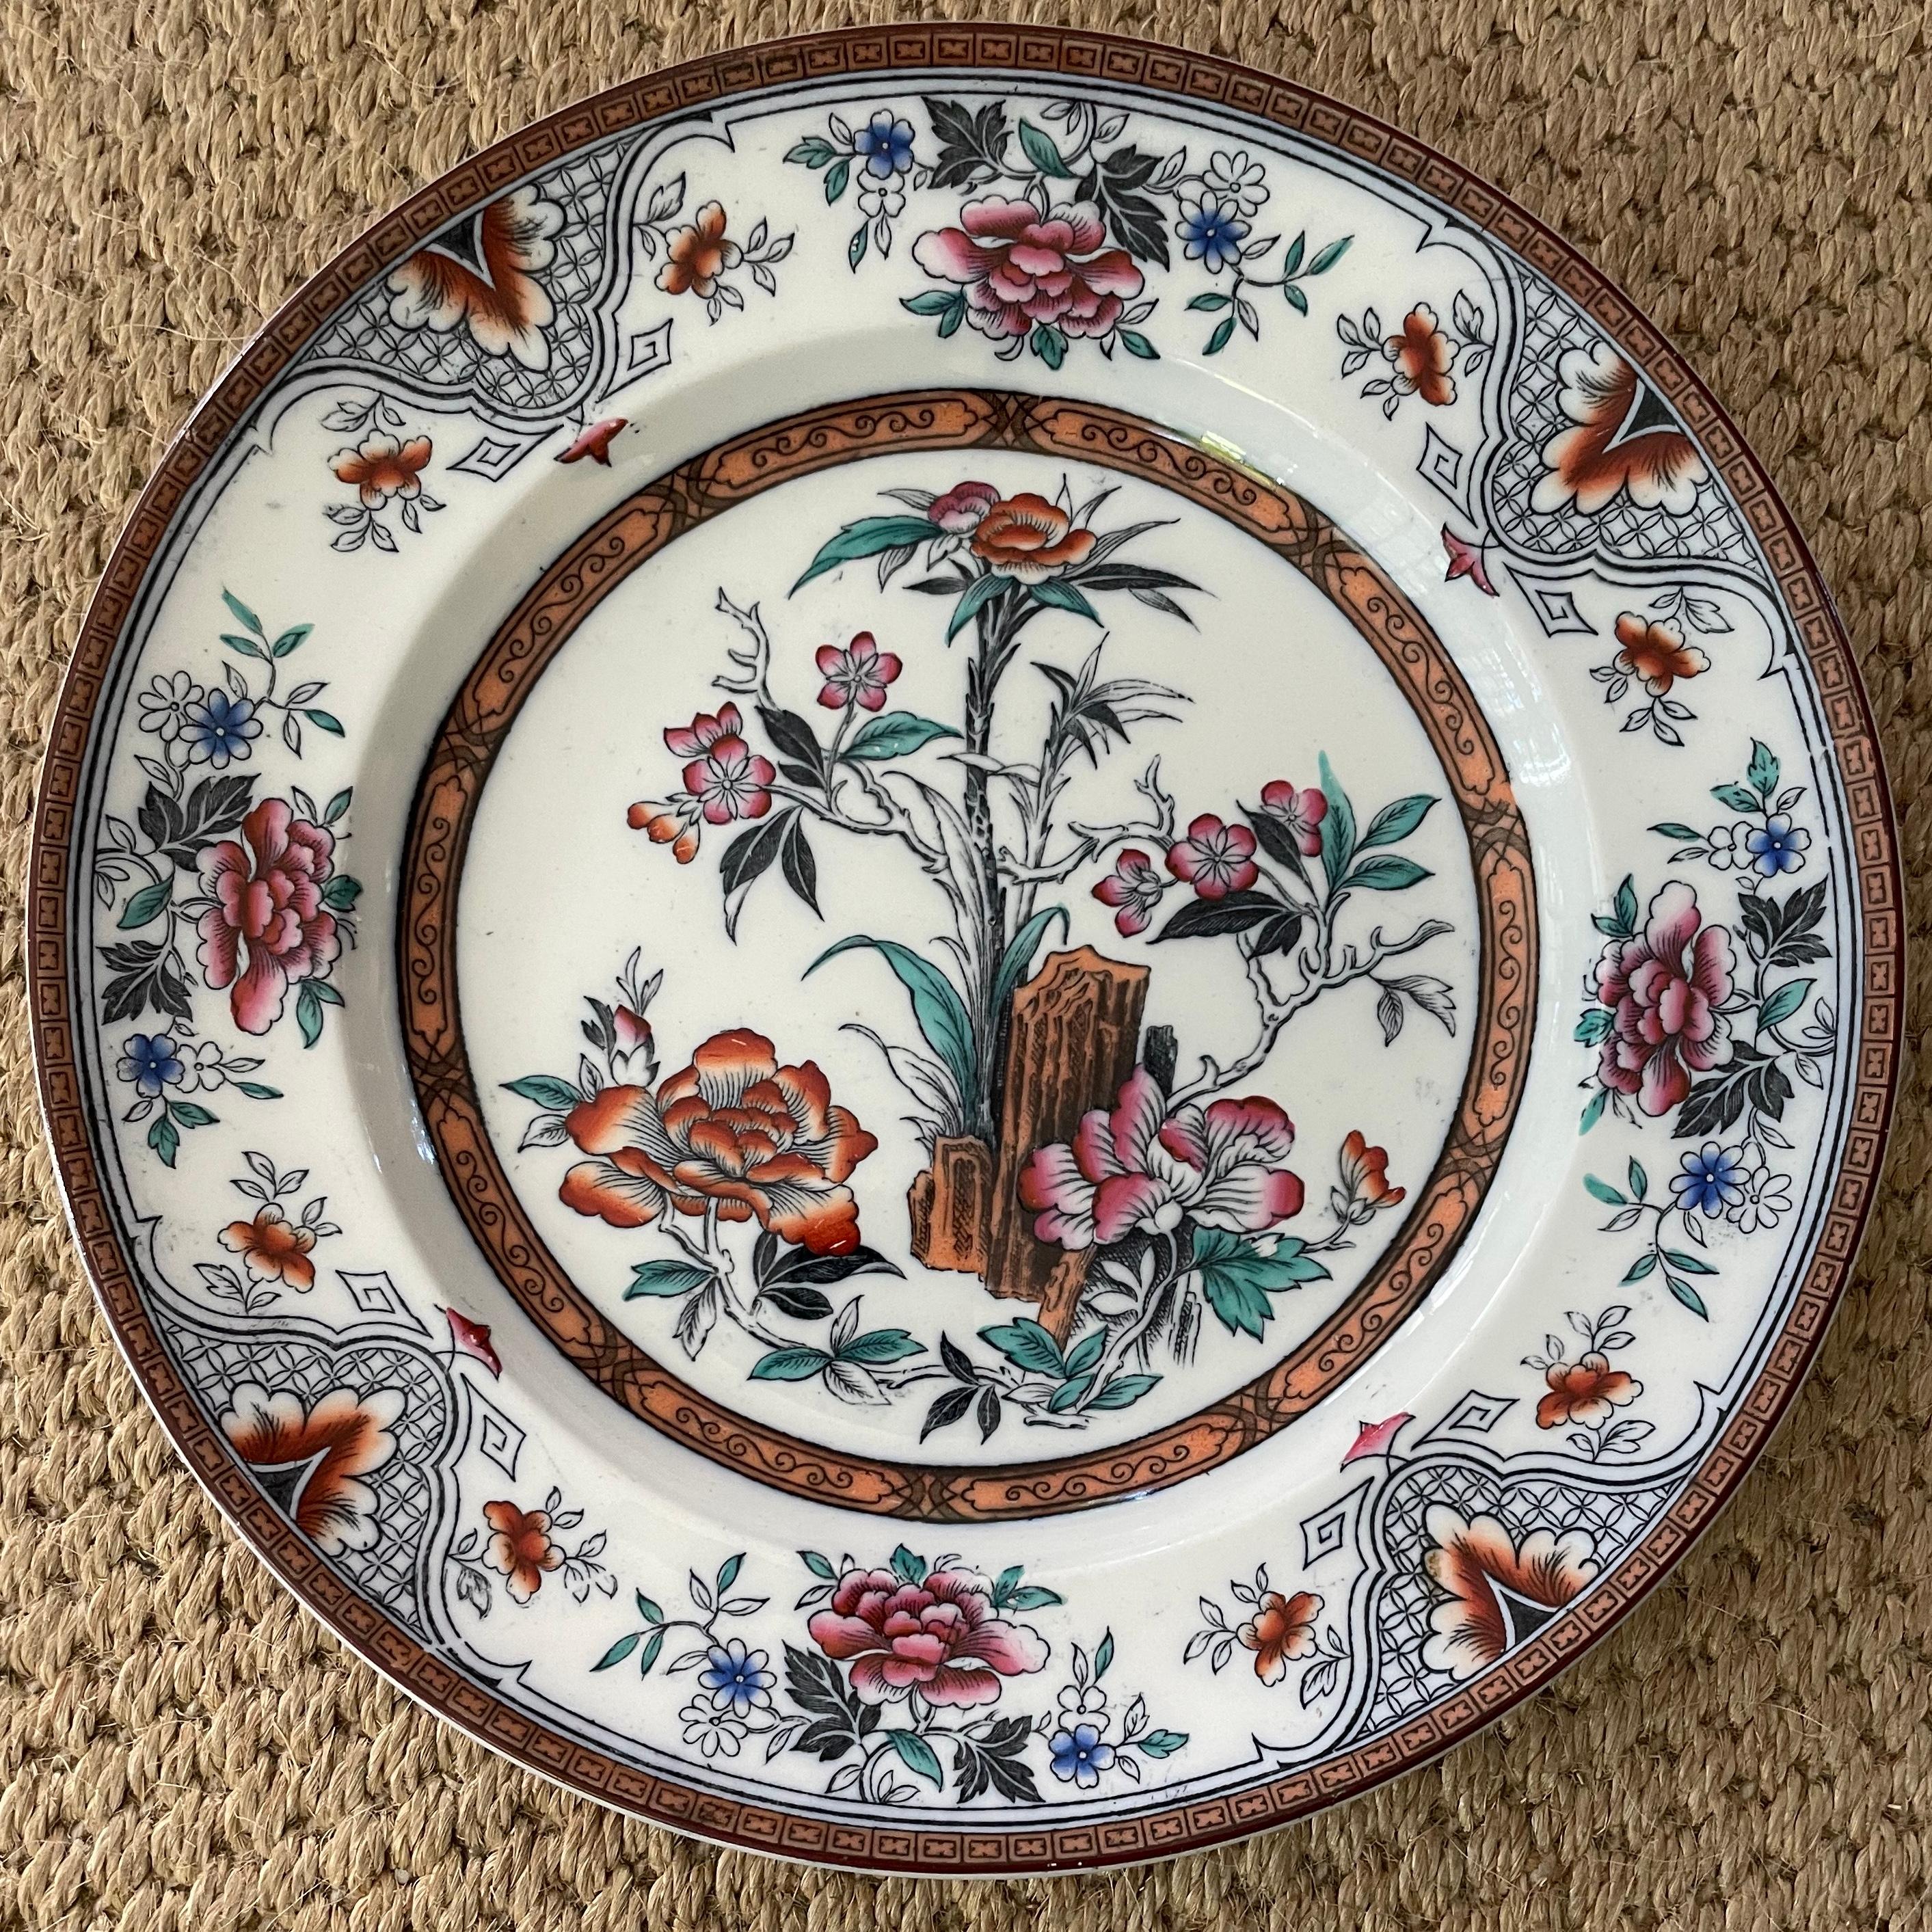 Set of Ten Wedgwood Chinoiserie Plates 3